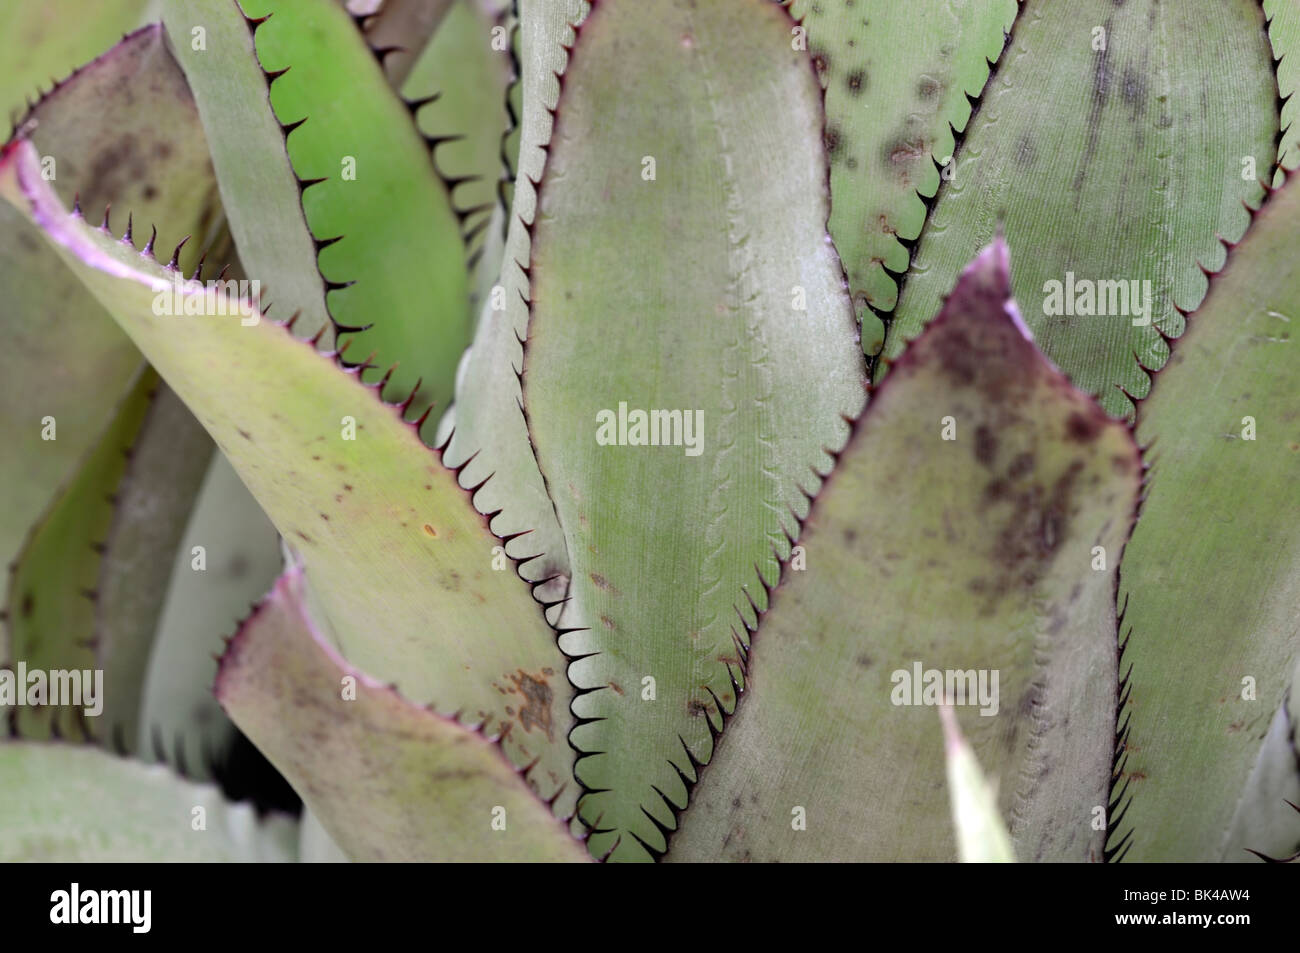 bilbergia  bromeliad without flower closeup close up macro leaves spines cultivar sp variant Stock Photo